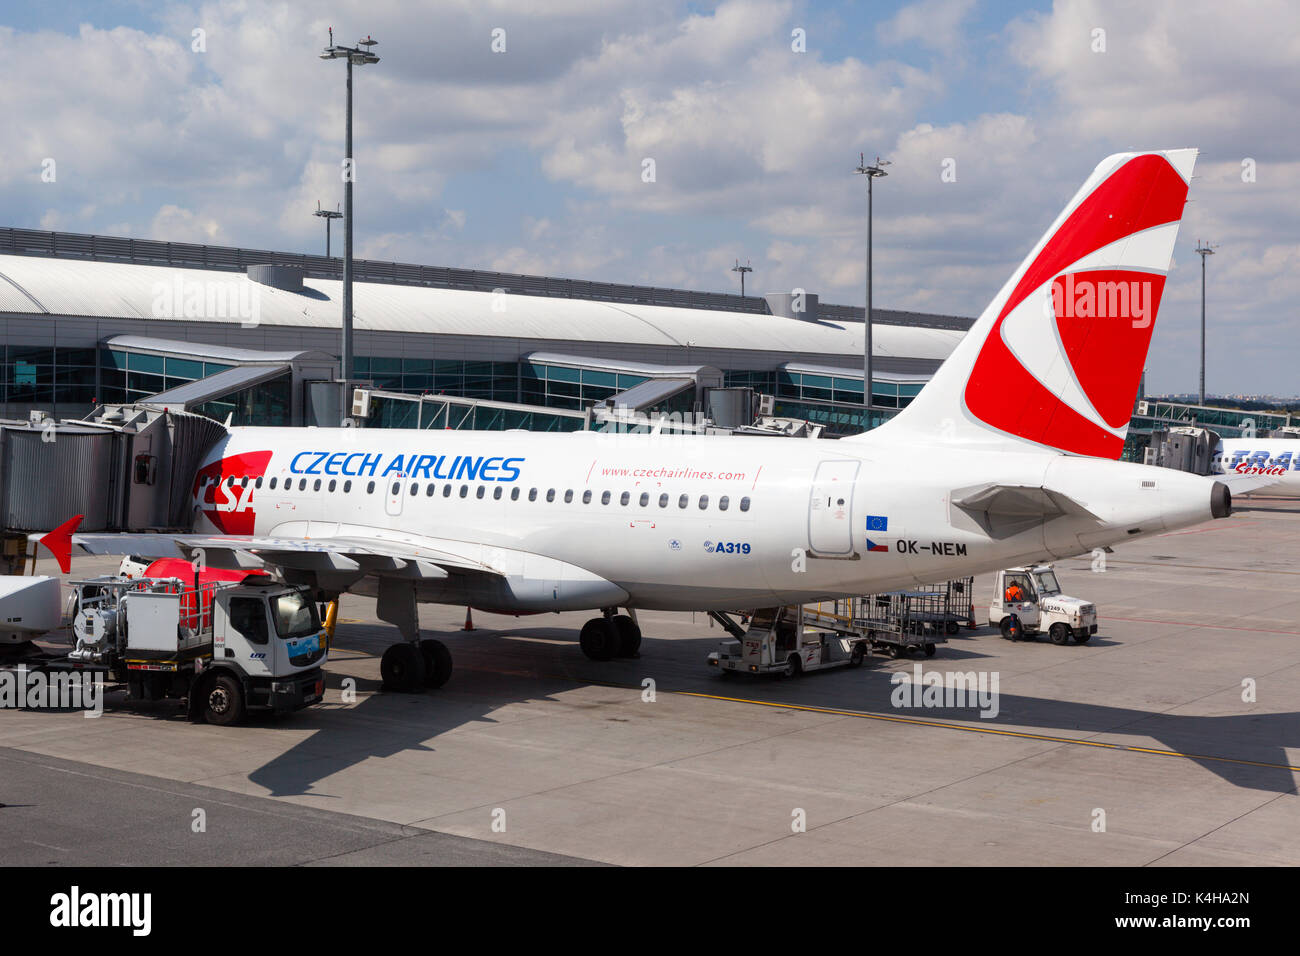 Czech Airlines (CSA) jet, parked in Prague airport. CSA is the national airline of the Czech Republic. Stock Photo